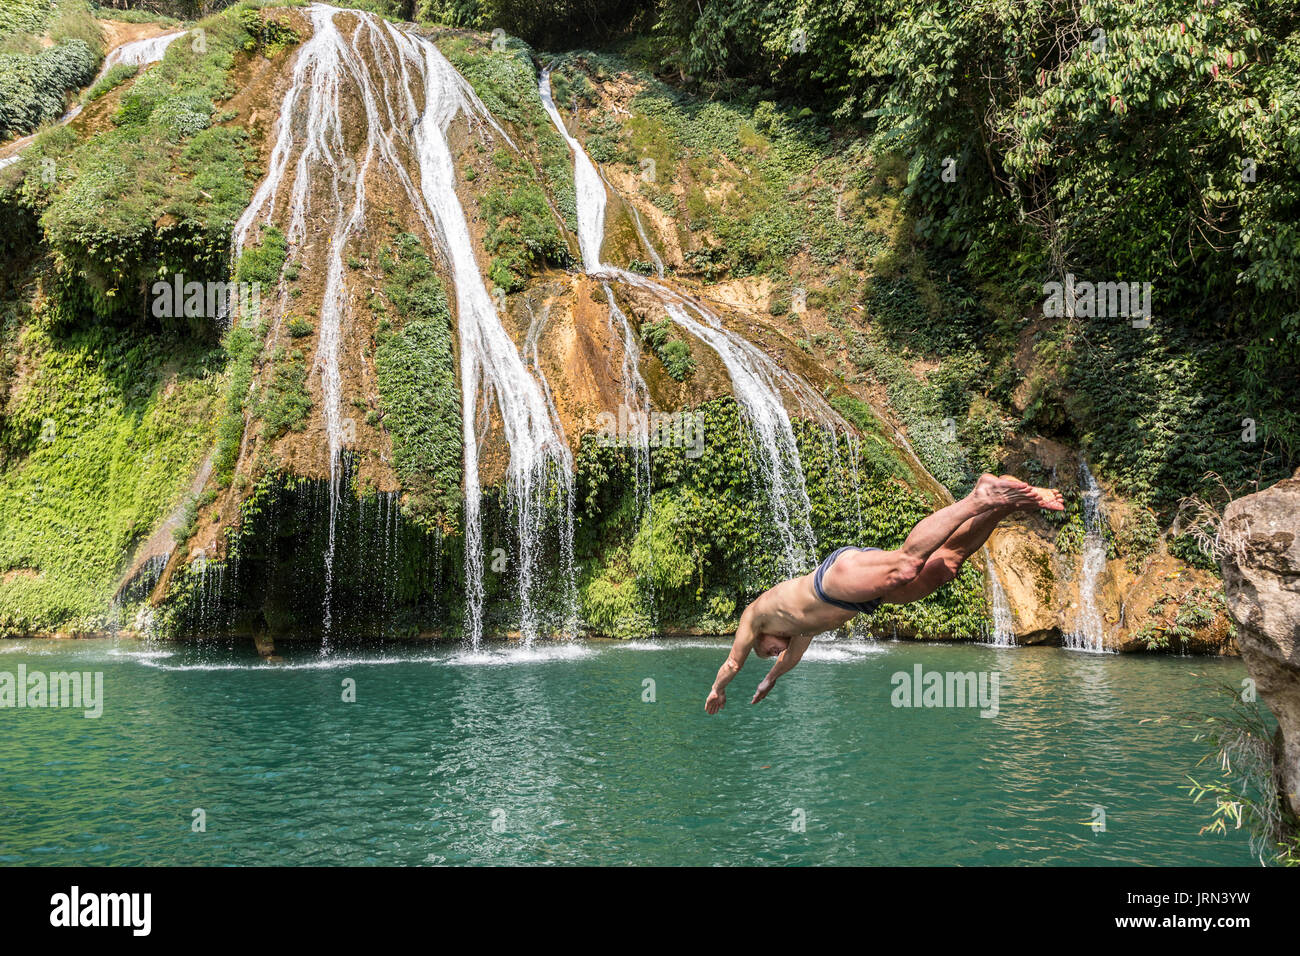 Man diving into a pool at the base of a waterfall in a remote area of Meghalaya, India Stock Photo